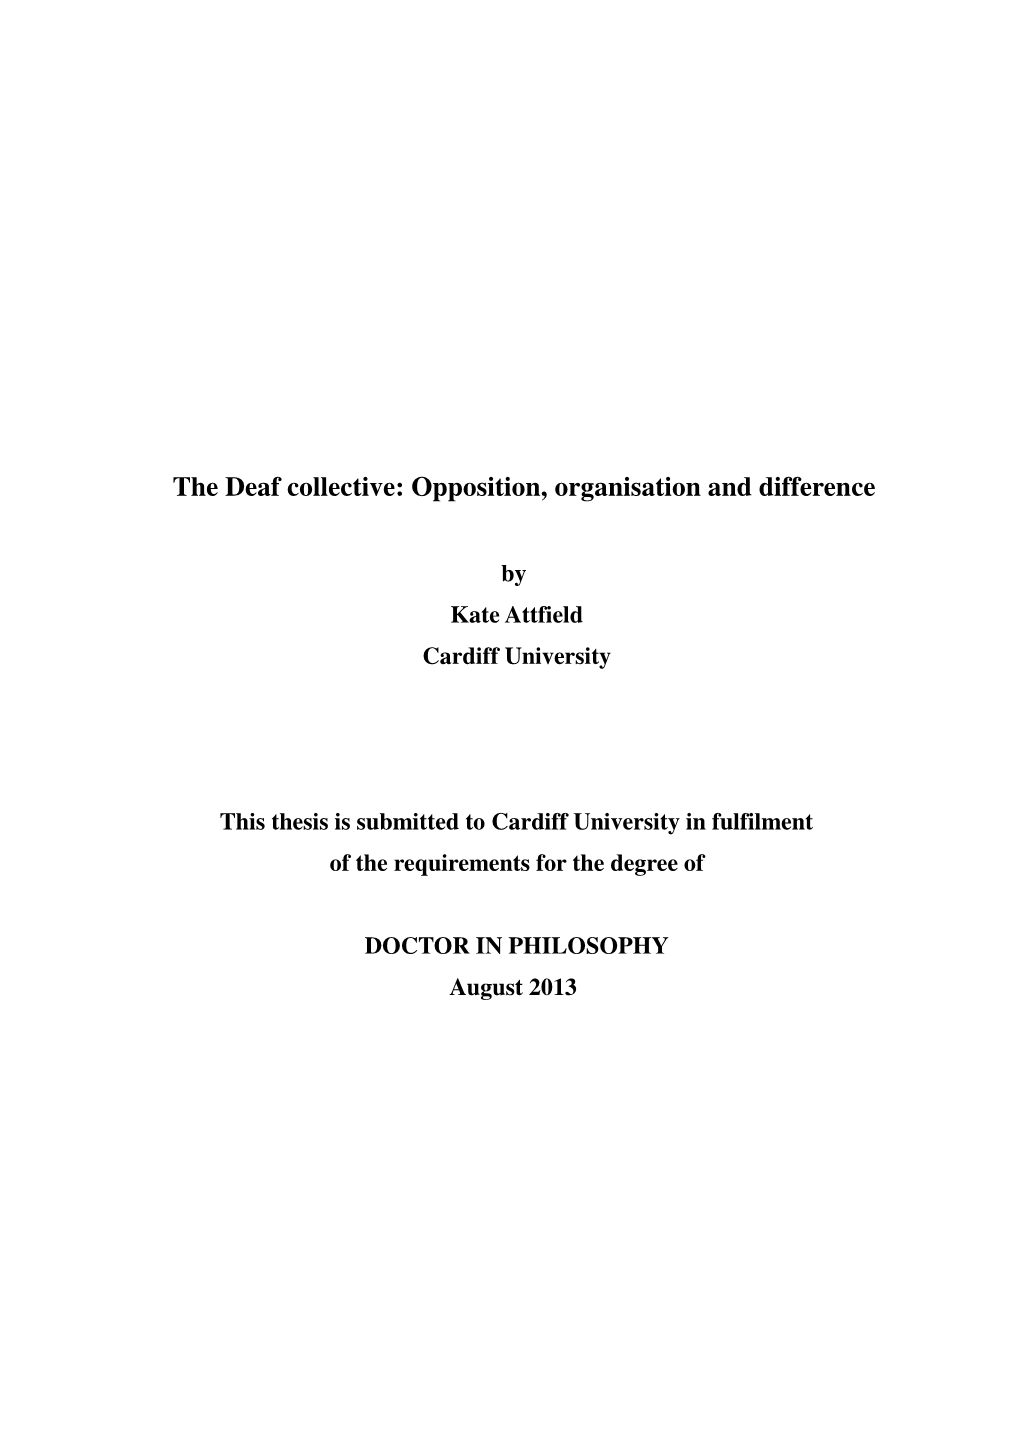 The Deaf Collective: Opposition, Organisation and Difference